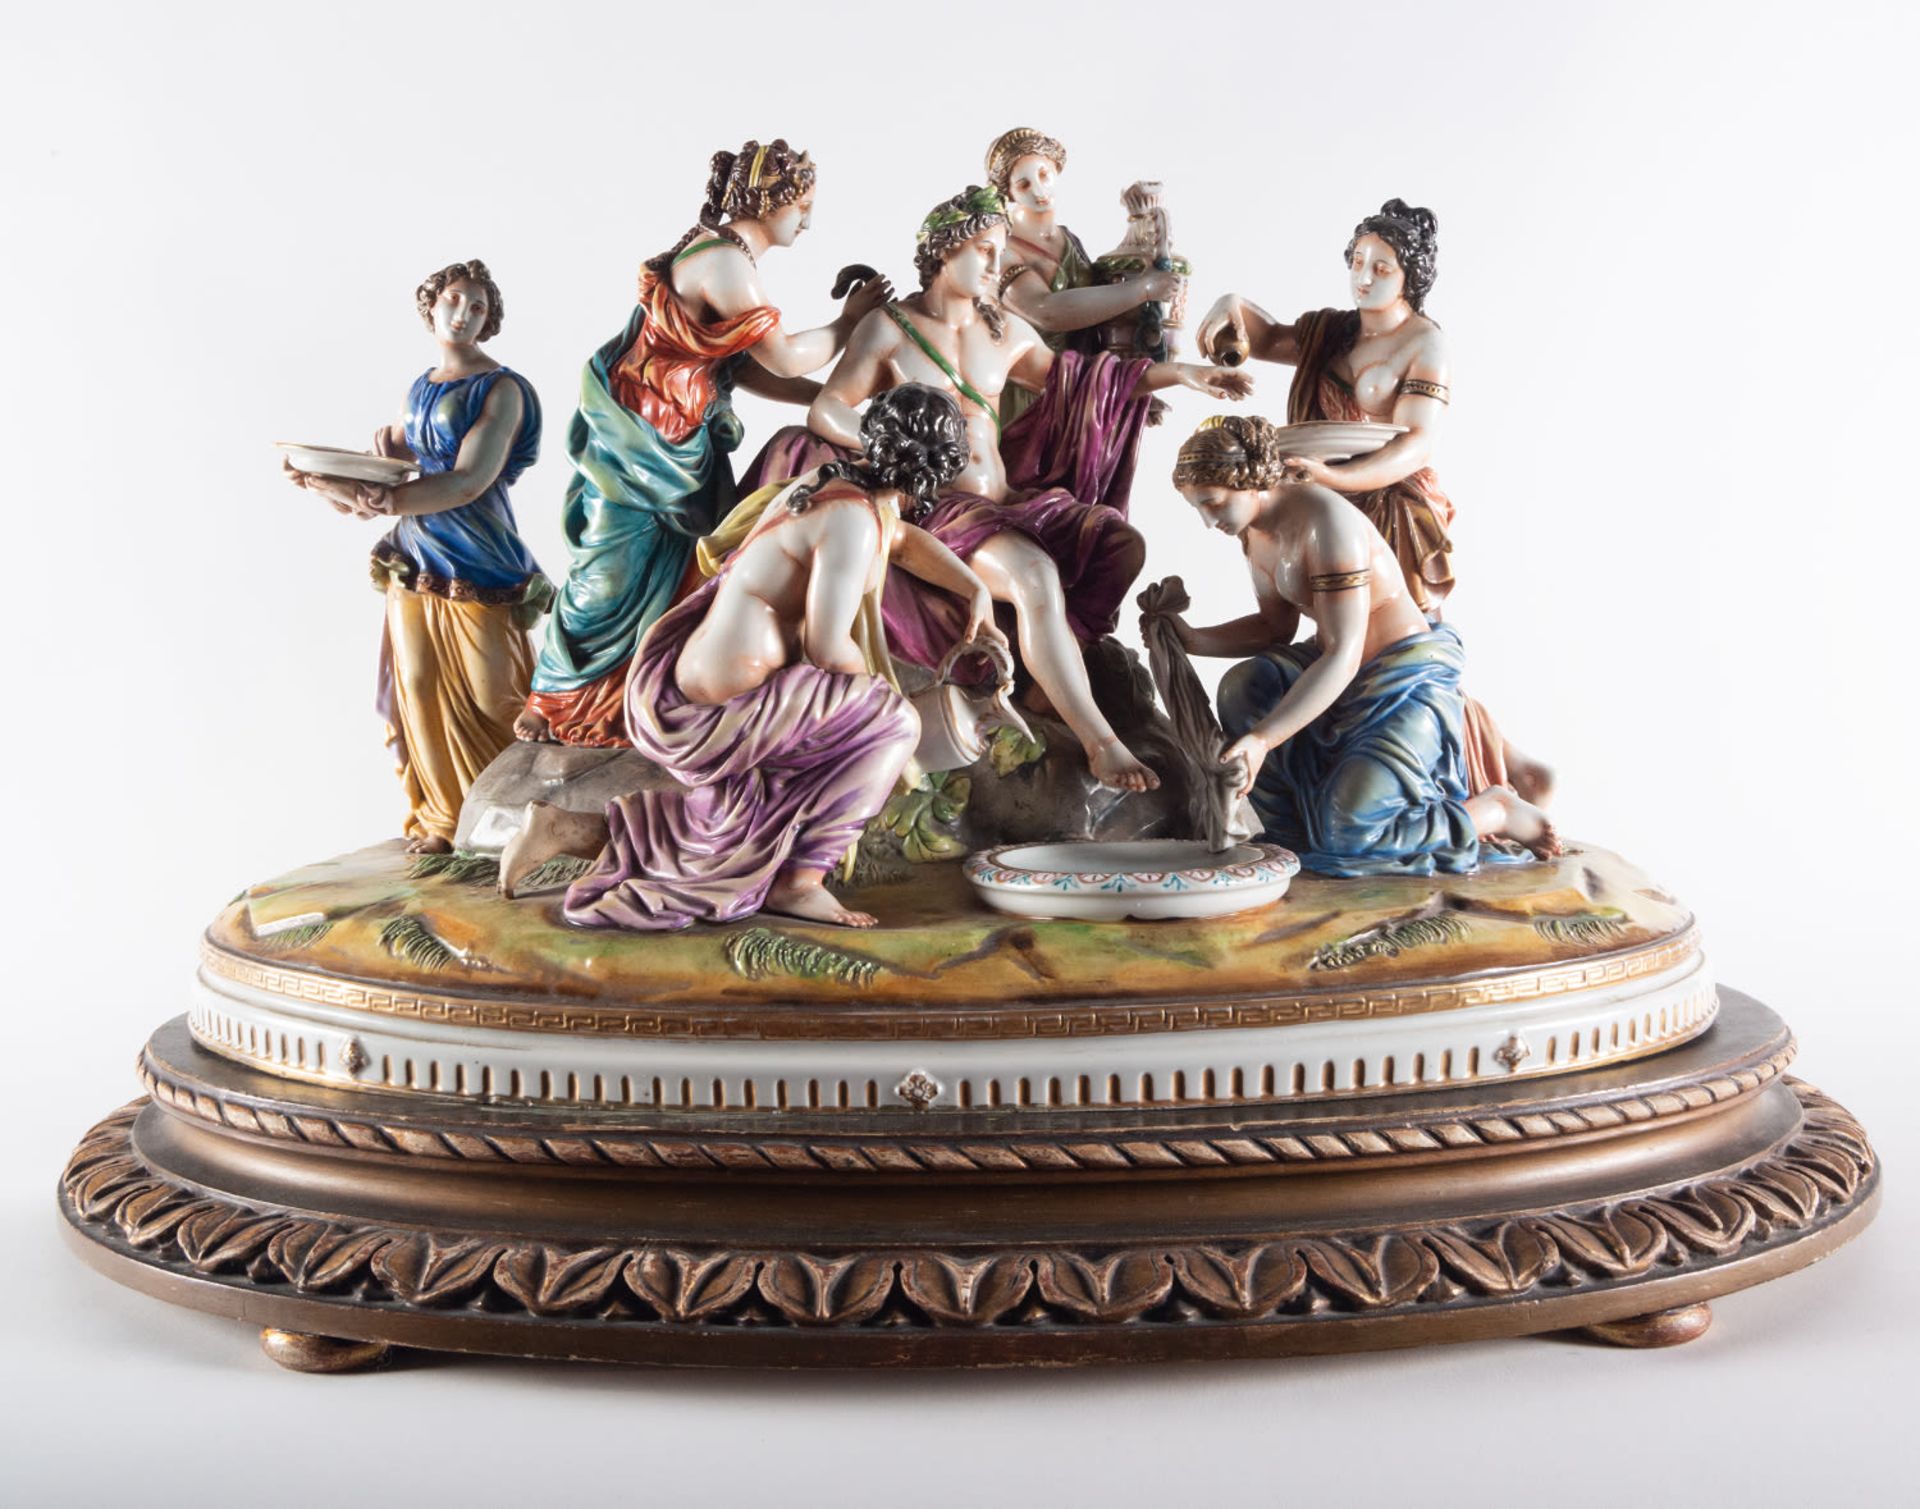 The Bath of Apollo, an important porcelain group from Capodimonte, 19th century